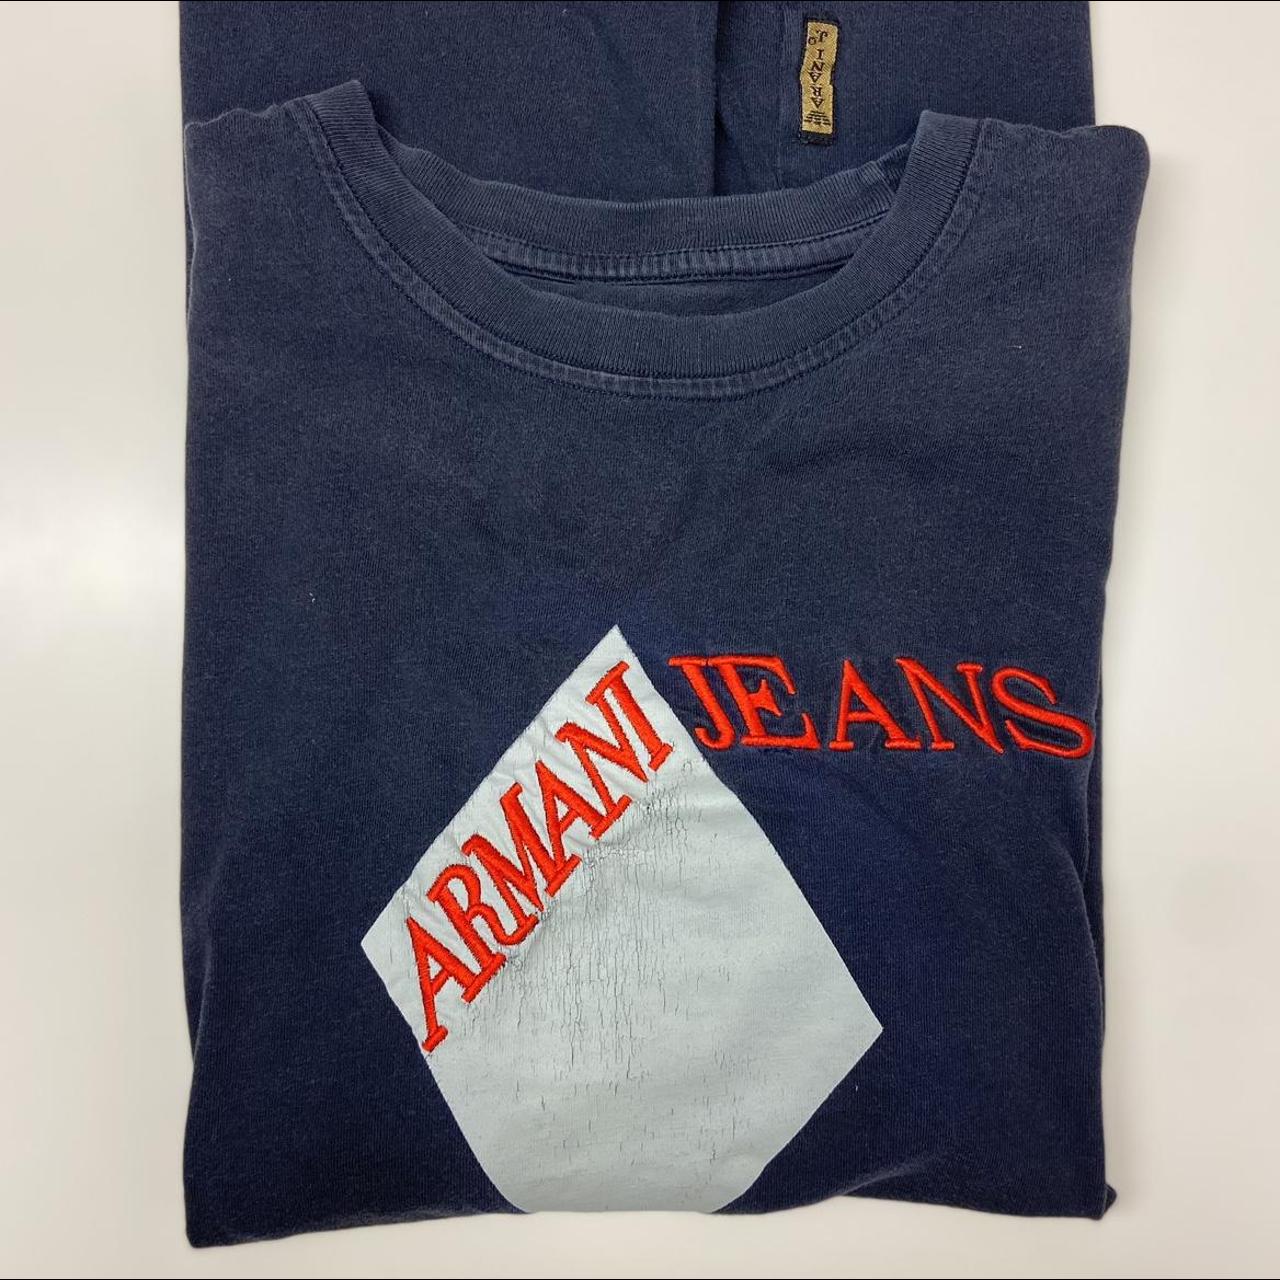 Armani Jeans Men's Navy and Red T-shirt